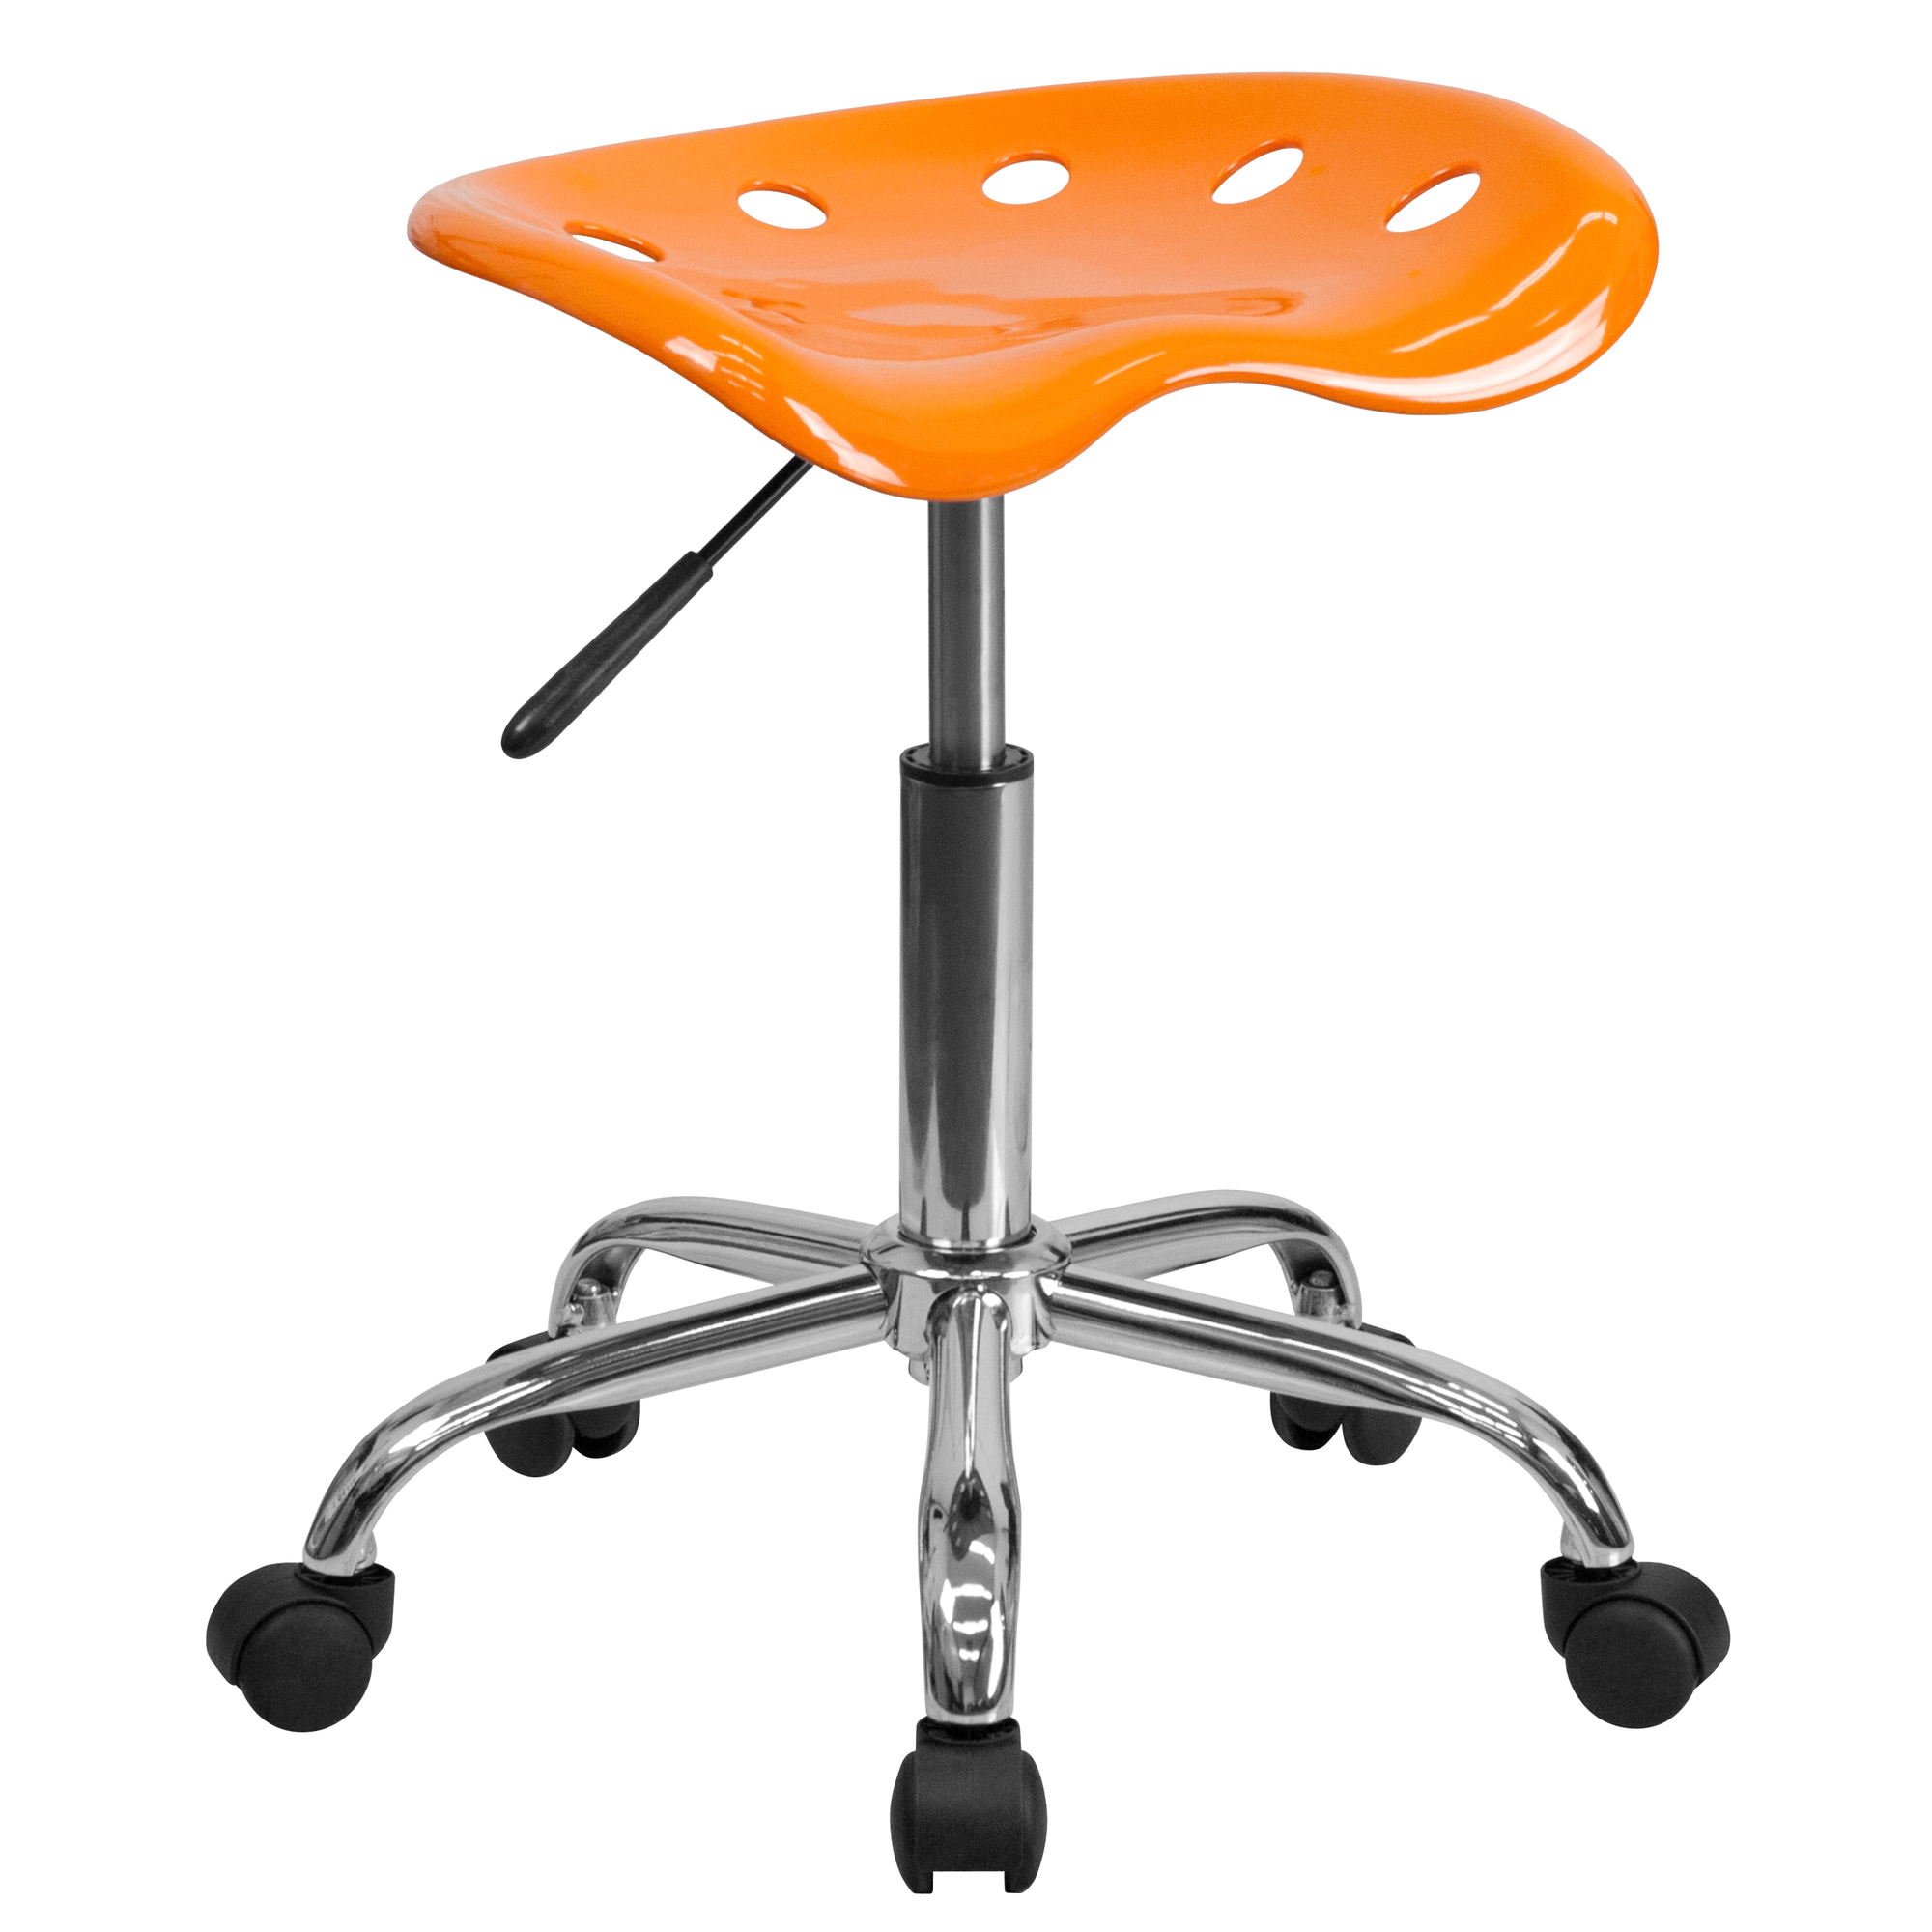 Vibrant Orange Tractor Seat and Chrome Stool, Primary Color Orange, Included (qty.) 1, Model - Flash Furniture LF214AORANYELL